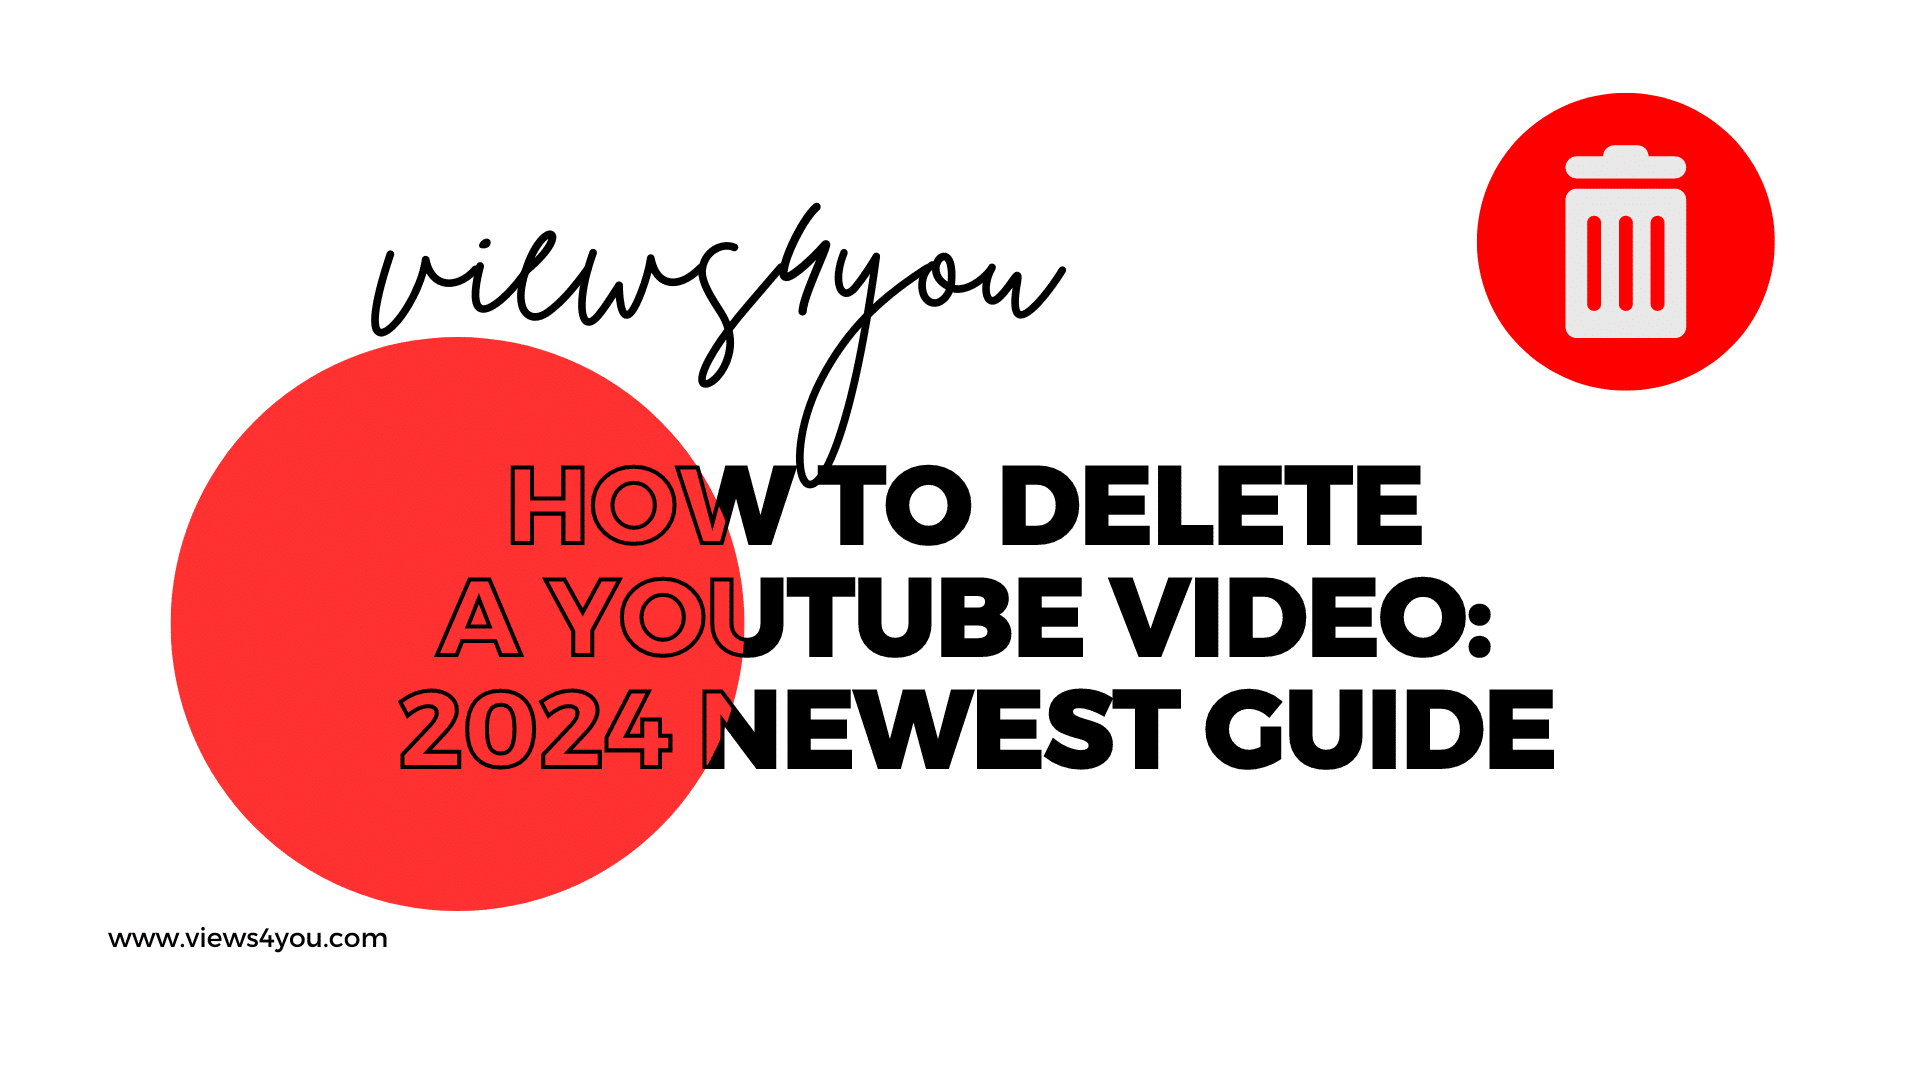 Learn how to delete youtube videos with the newest guide.